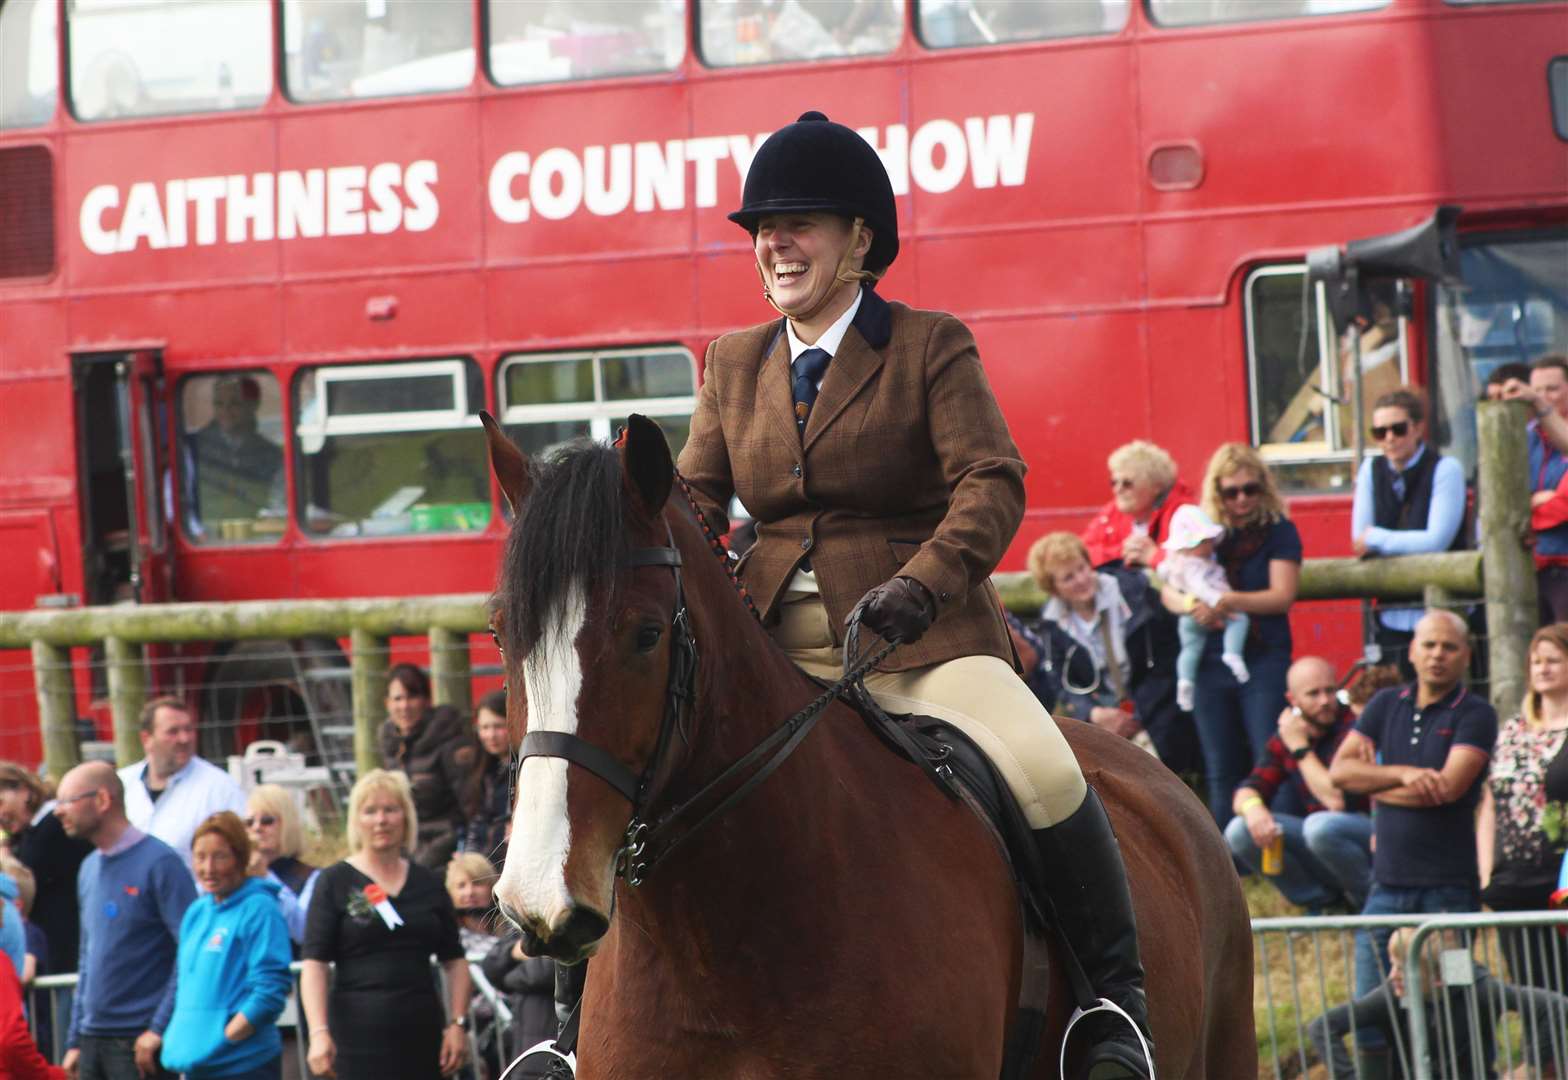 All smiles from Jacqueline Munro on her Clydesdale, Prince William of Aikers, at the County Show in Wick, 2019.